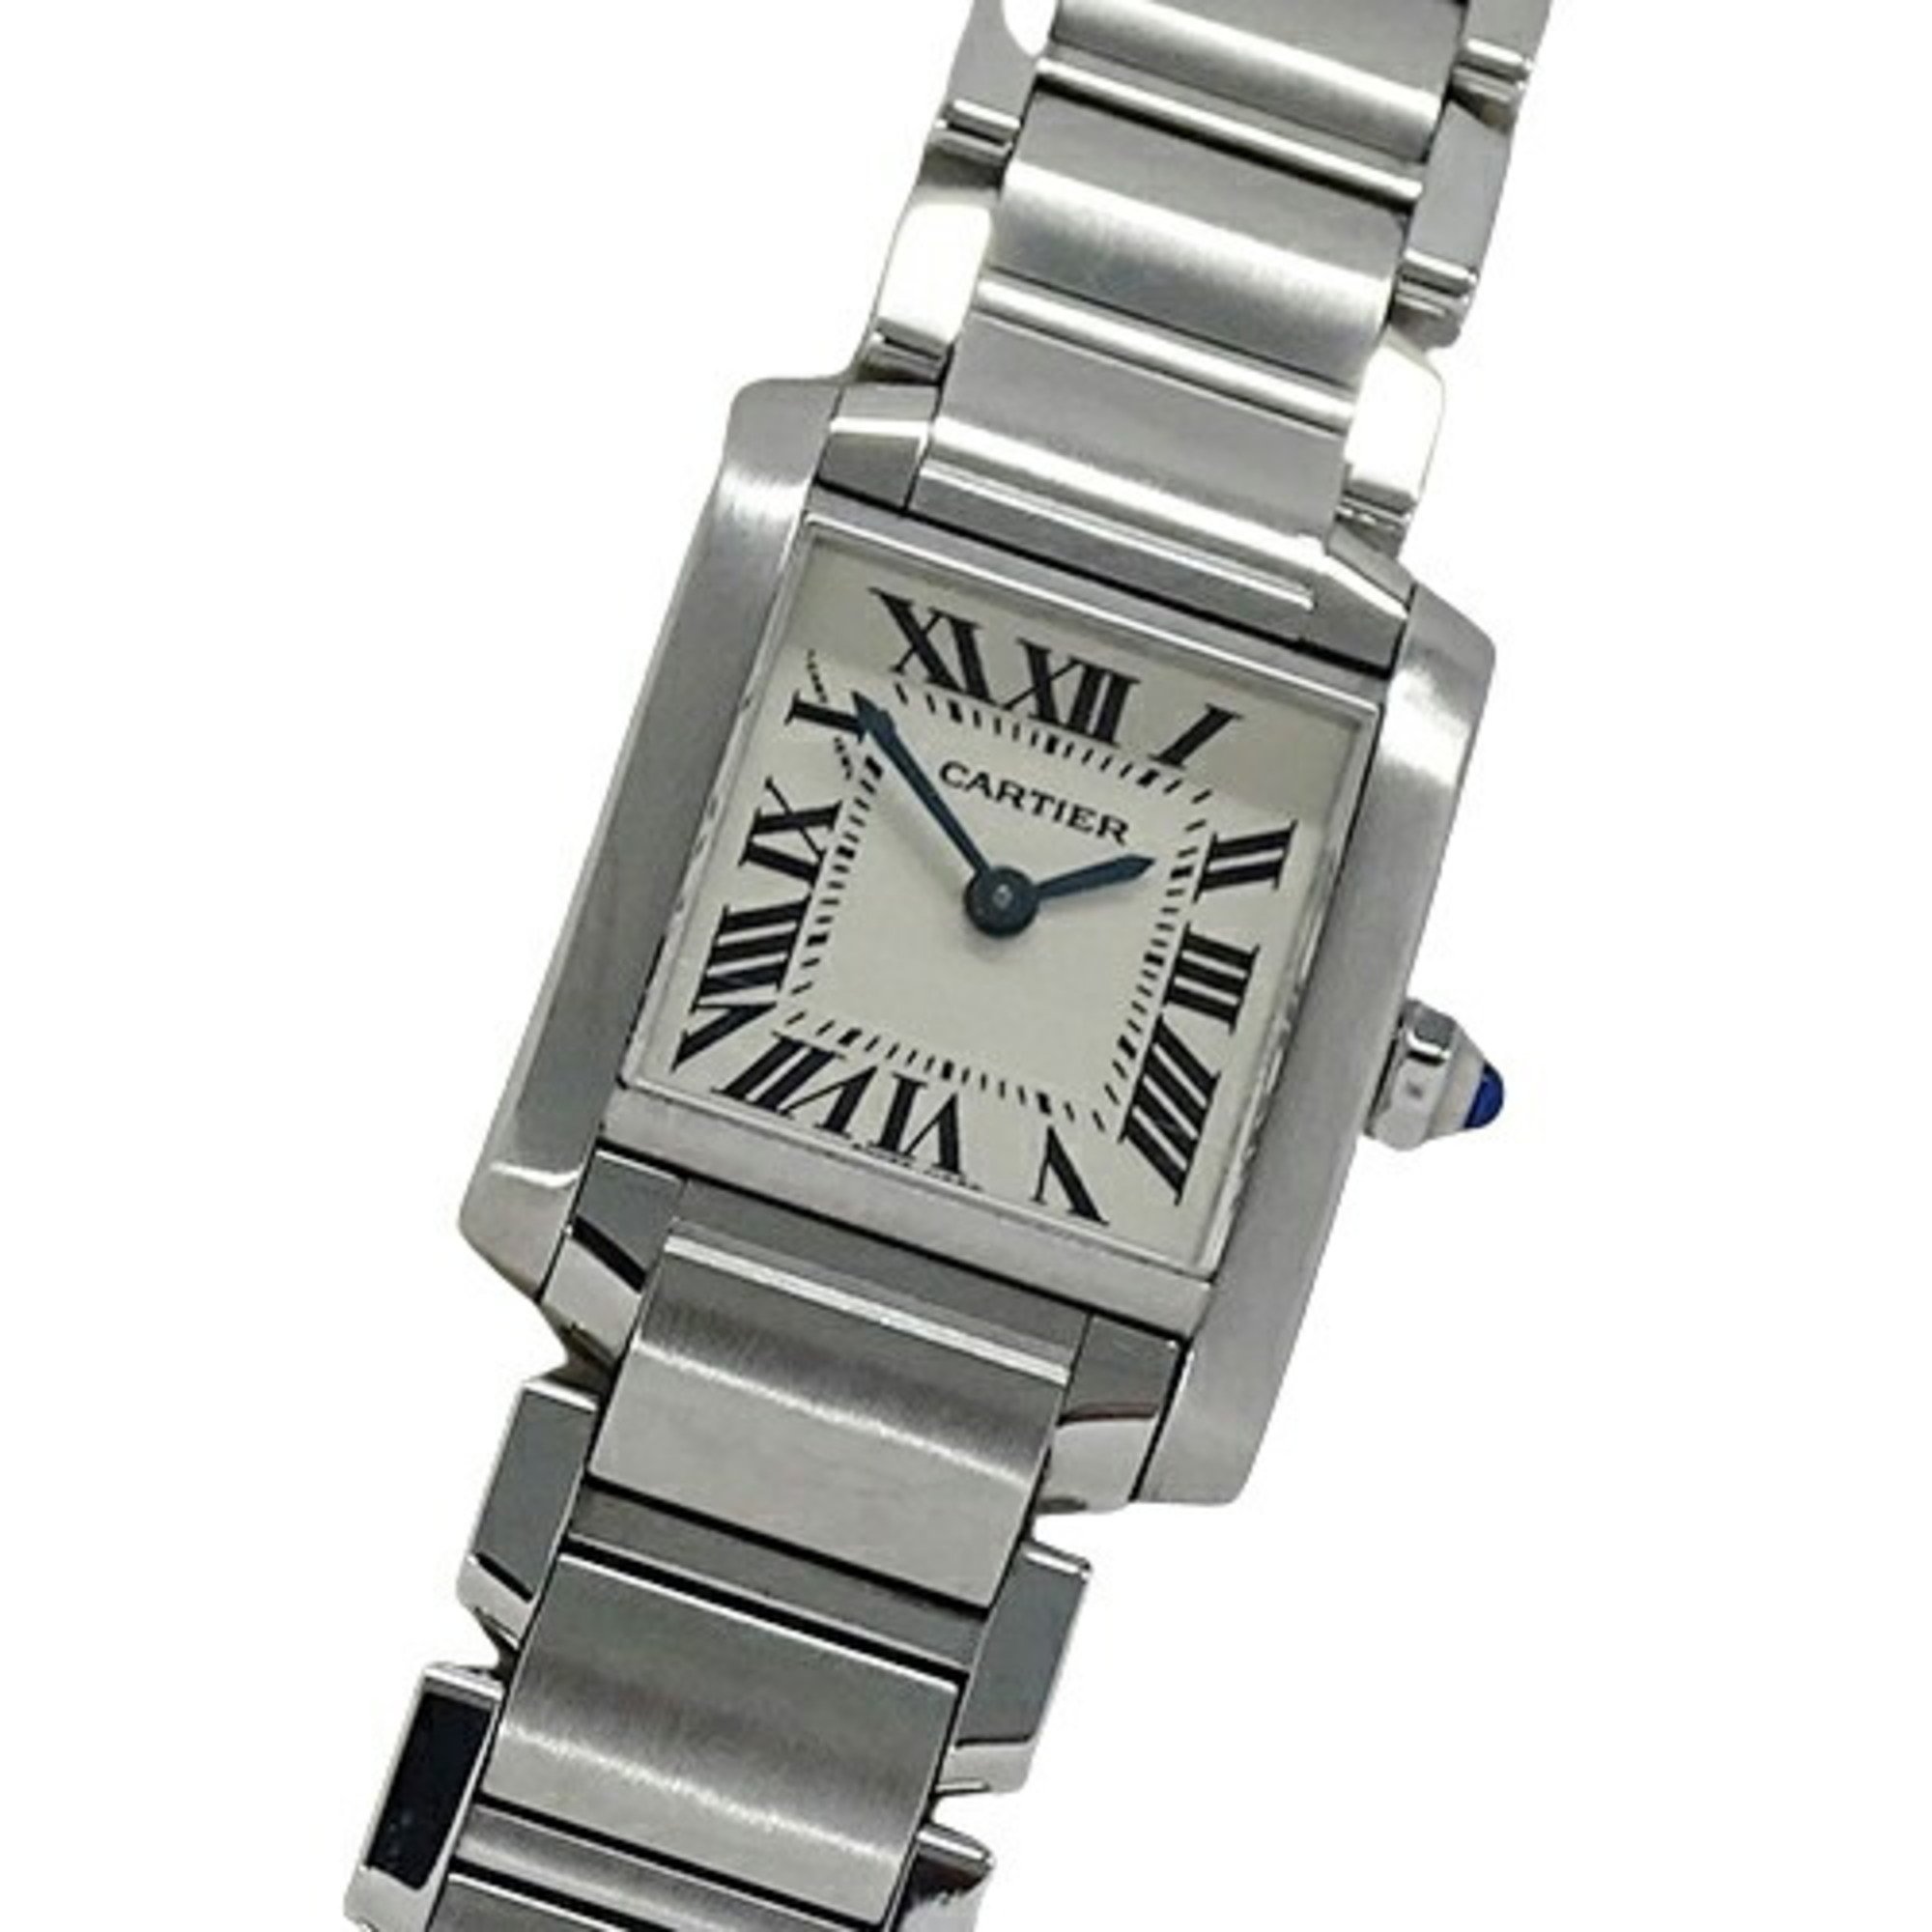 Cartier Tank Francaise SM Ladies Watch Quartz Stainless Steel SS W51008Q3 Silver Ivory Polished